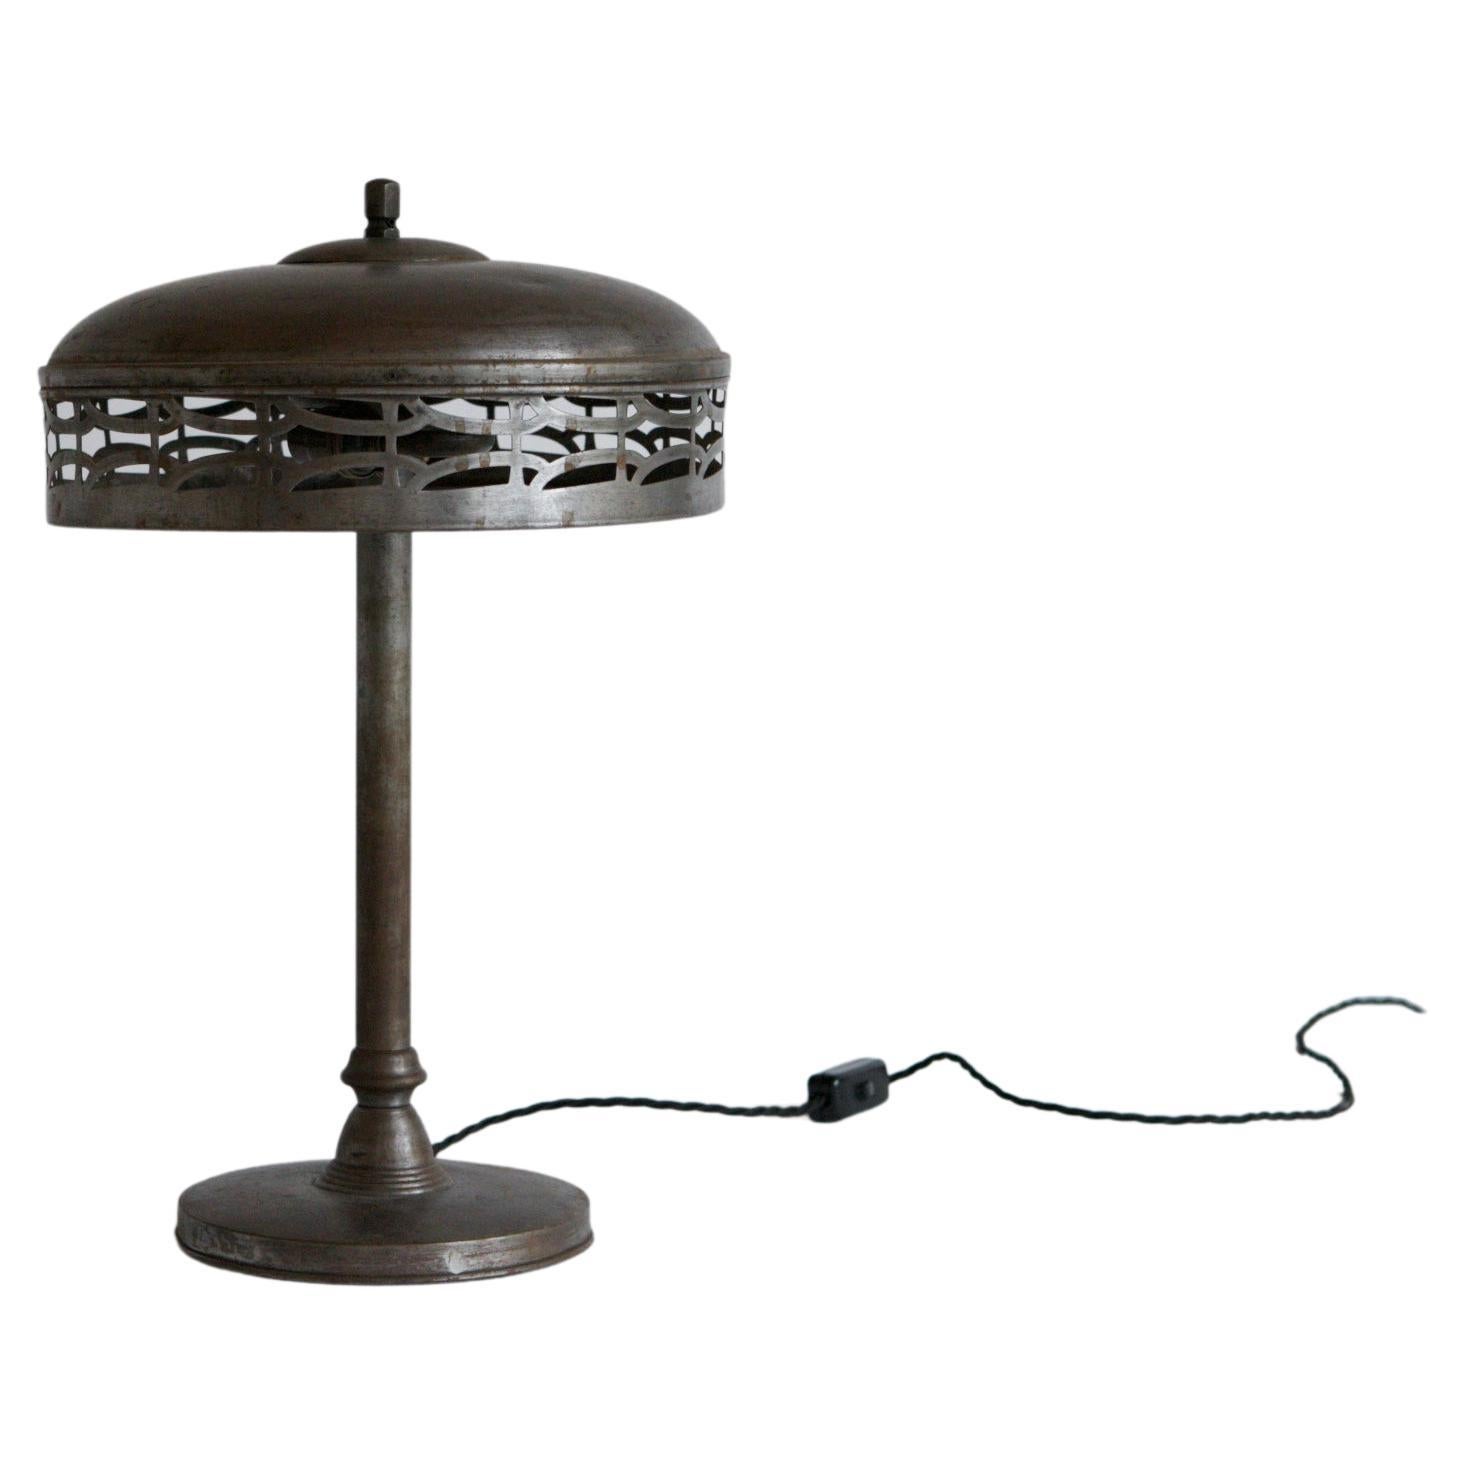 Early Modernist Table Lamp, Viennese Style